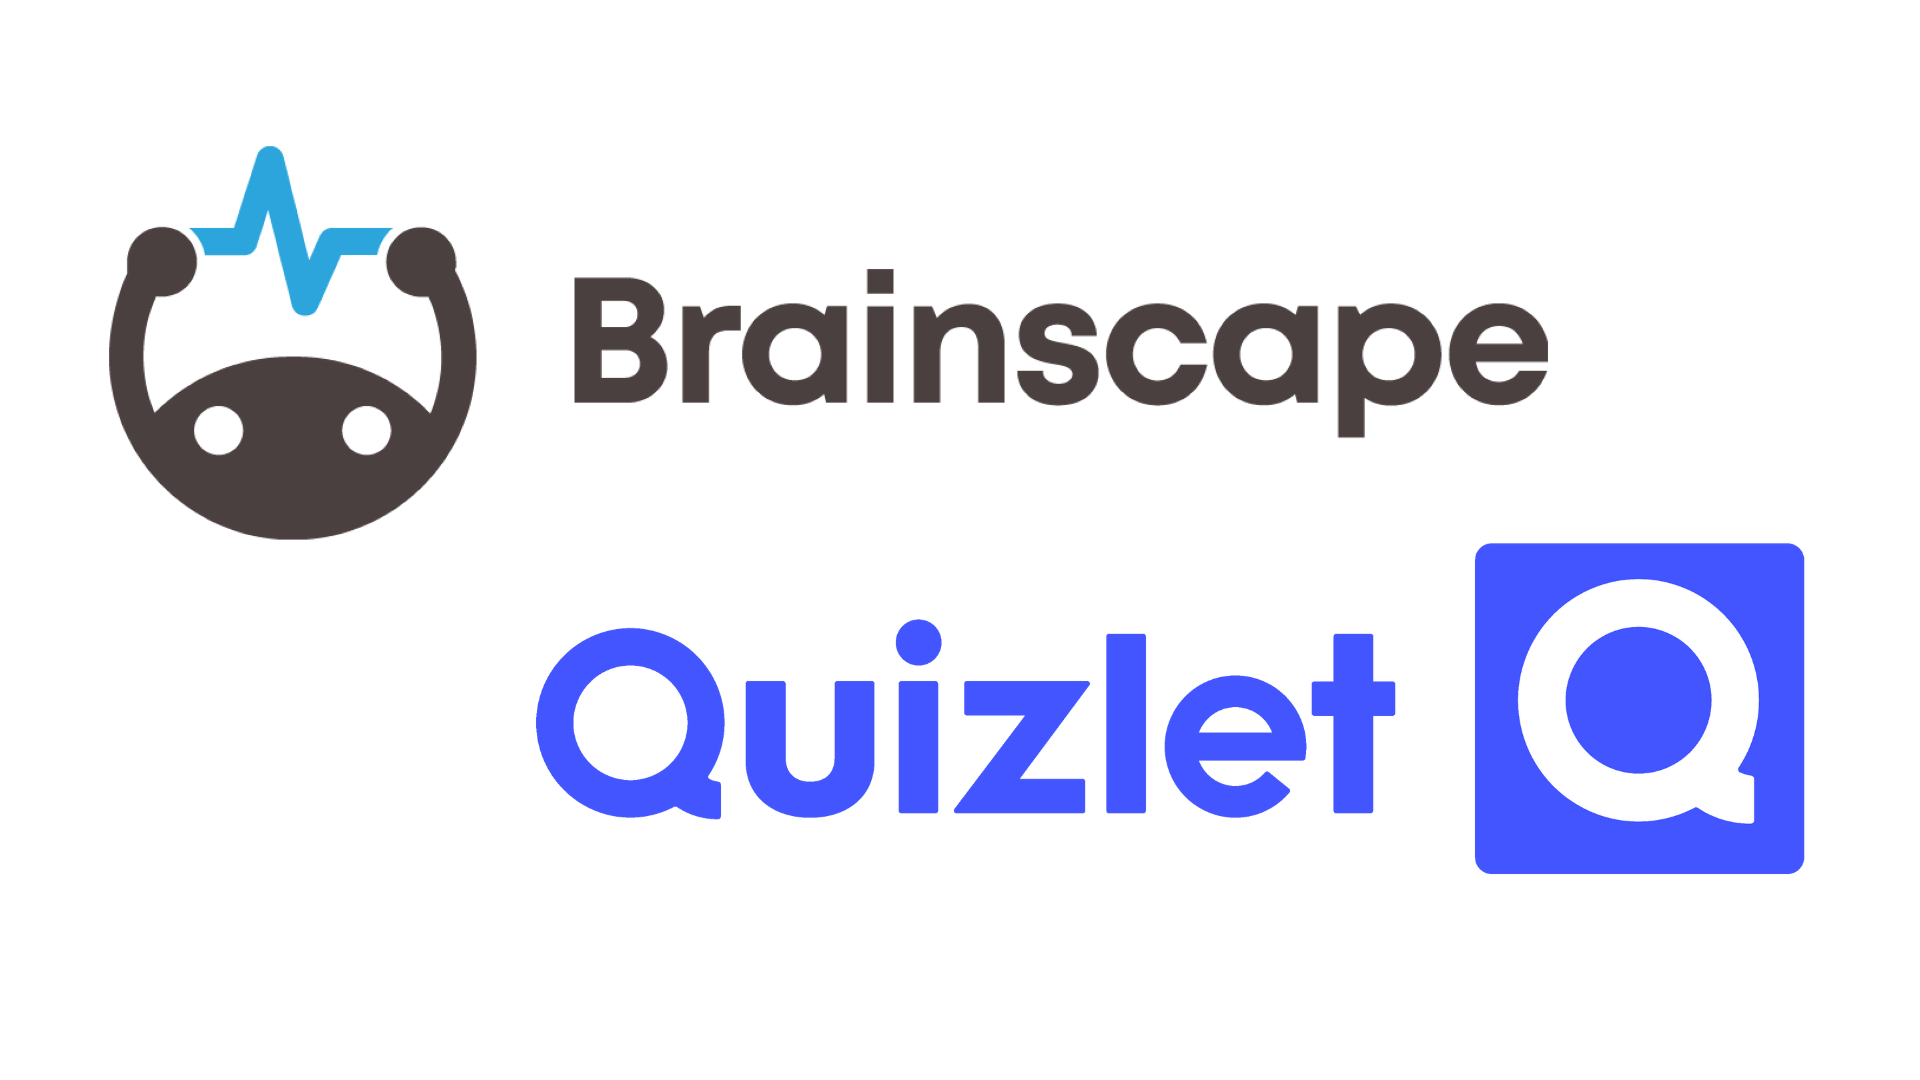 Brainscape and Quizlet flashcard apps